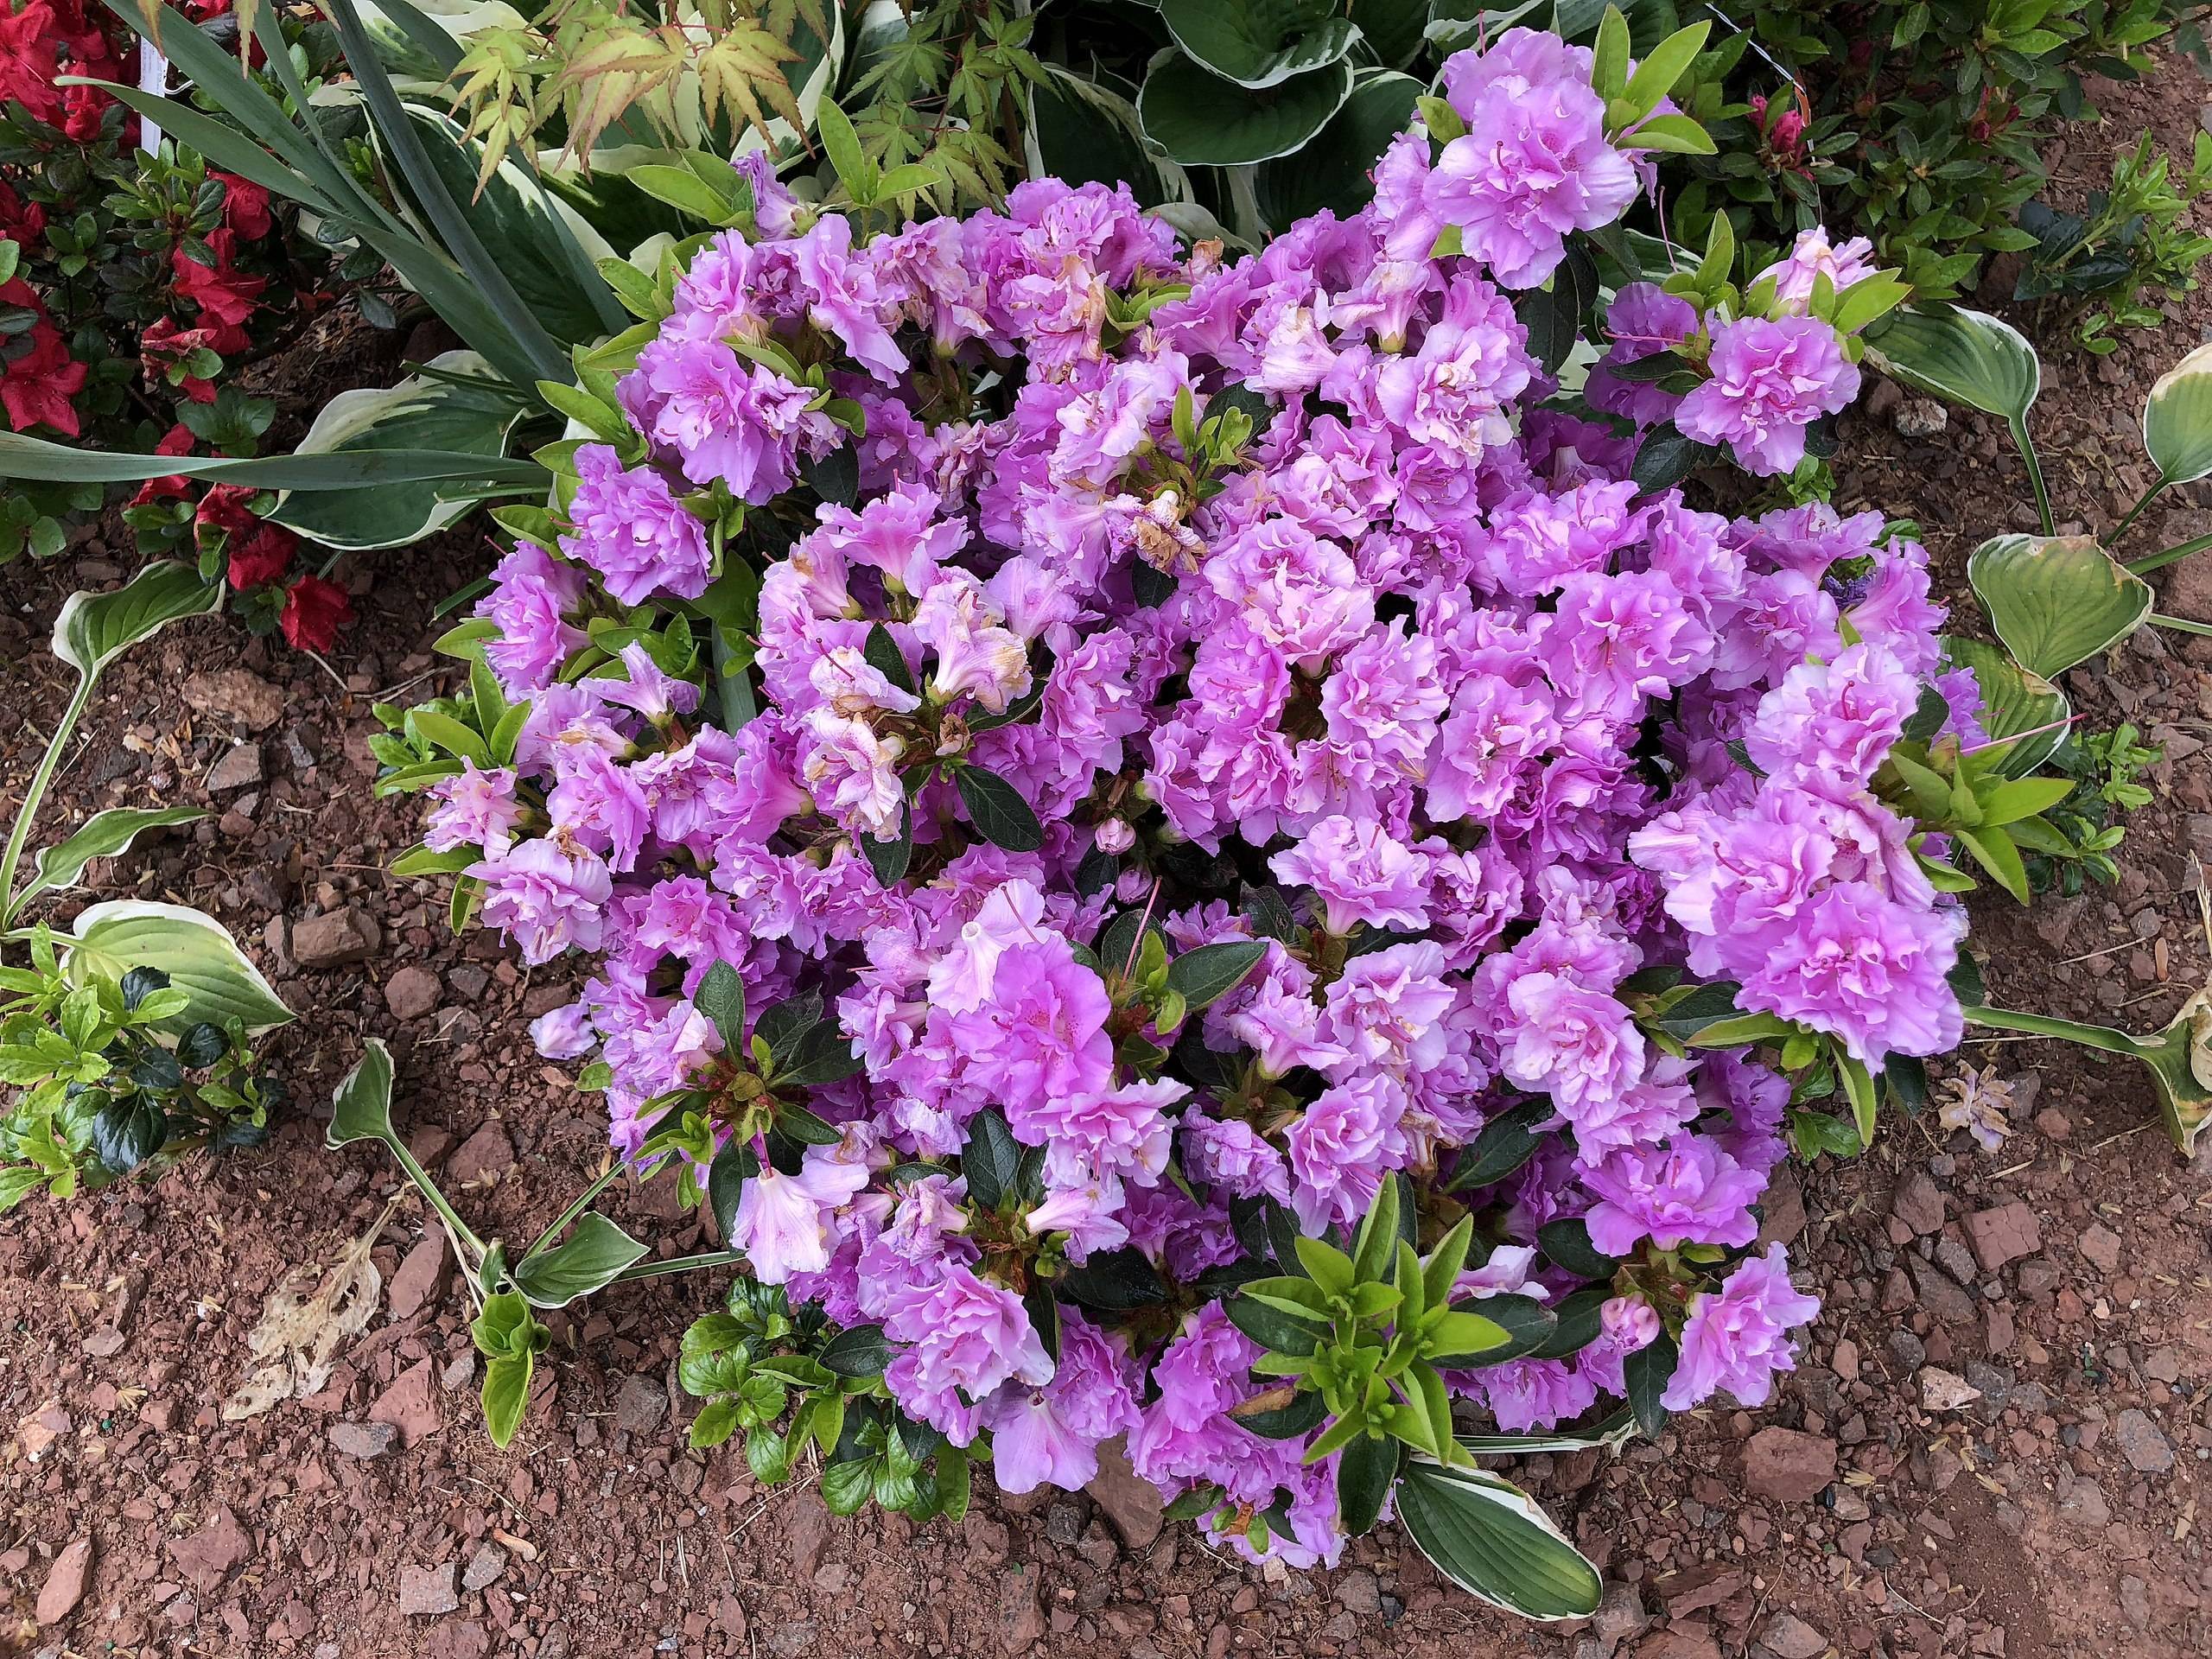 purple flowers with green leaves and green stems